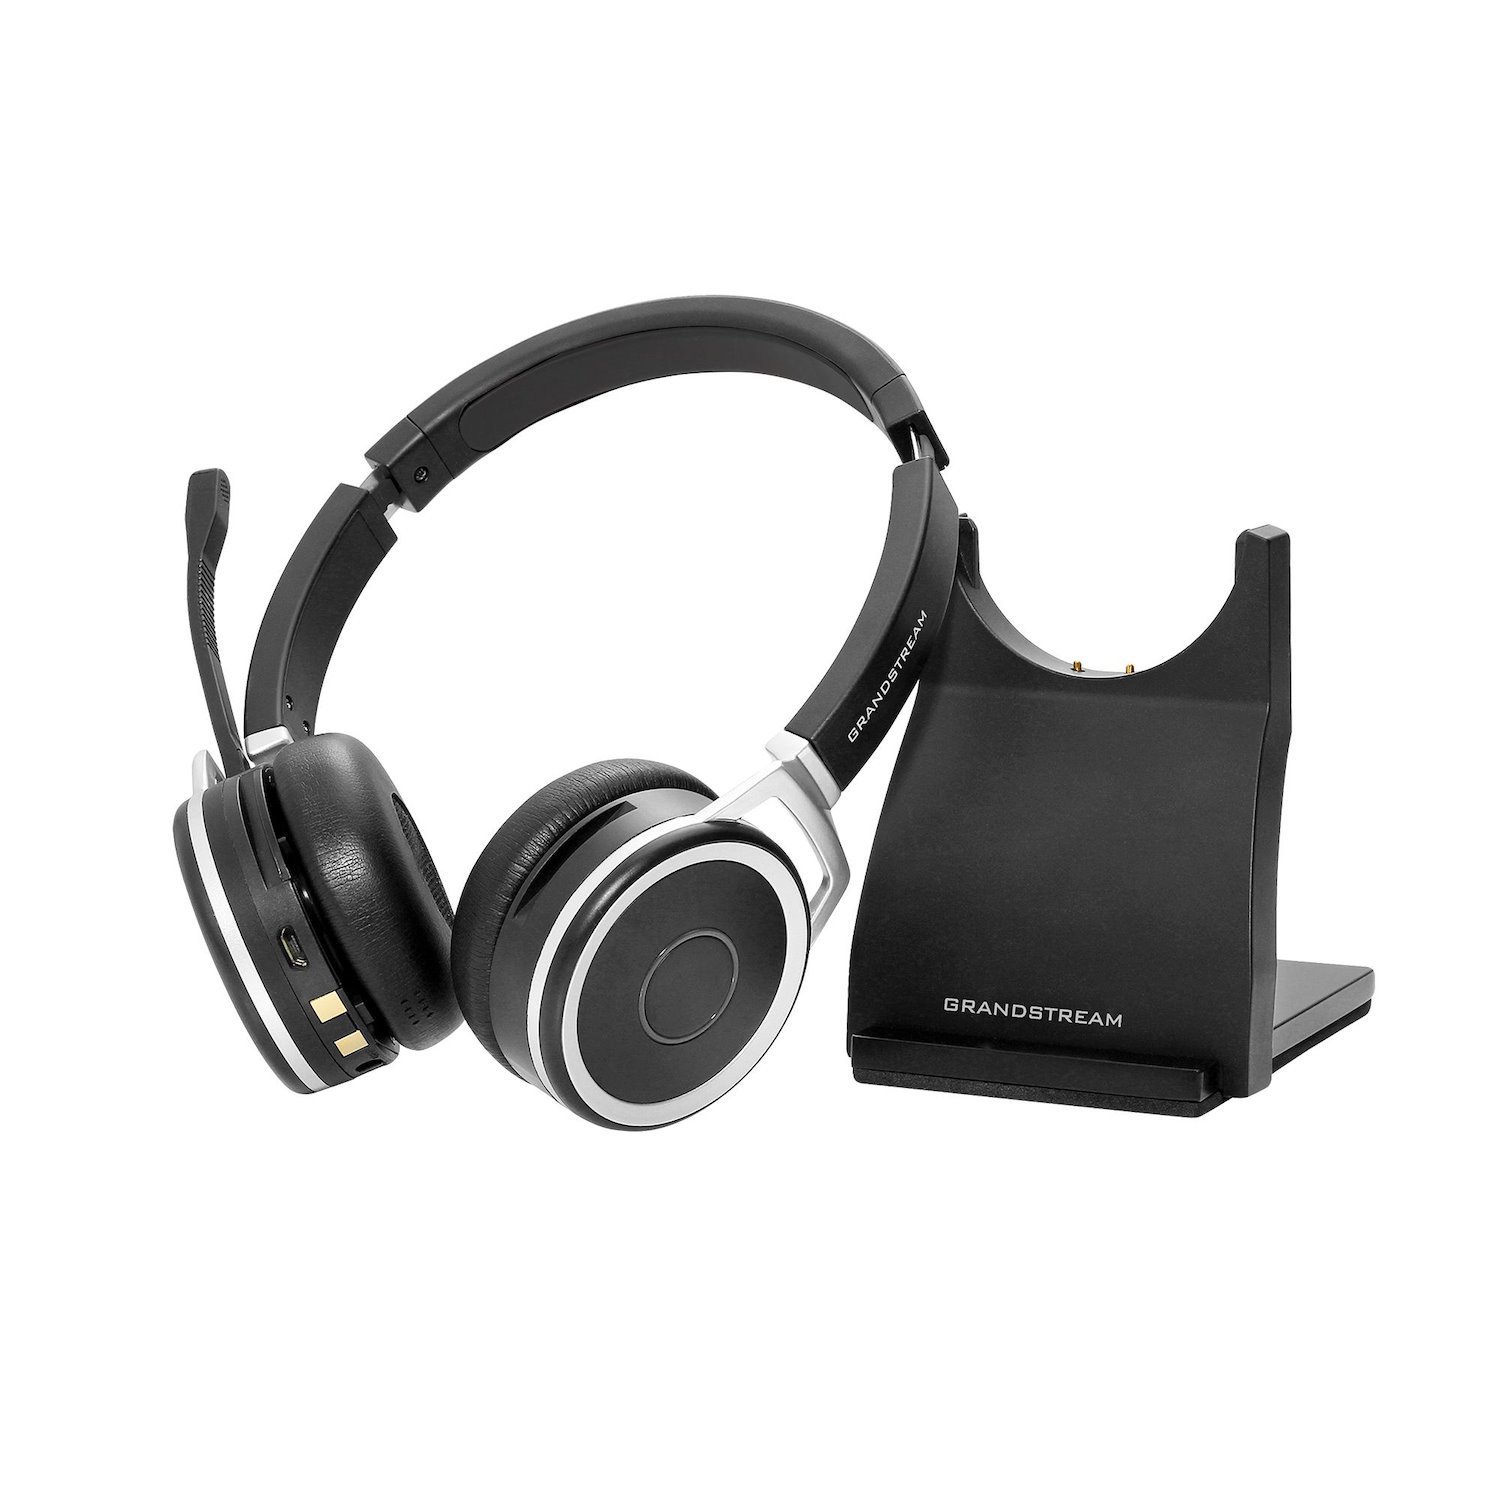 Grandstream Networks Guv3050 Headphones/Headset Wireless Head-Band Office/Call Center Usb Type-A Bluetooth Black Silver (Headphones/Headset Wireless - Head-Band Office/Call Center - Usb Type-A Blueto